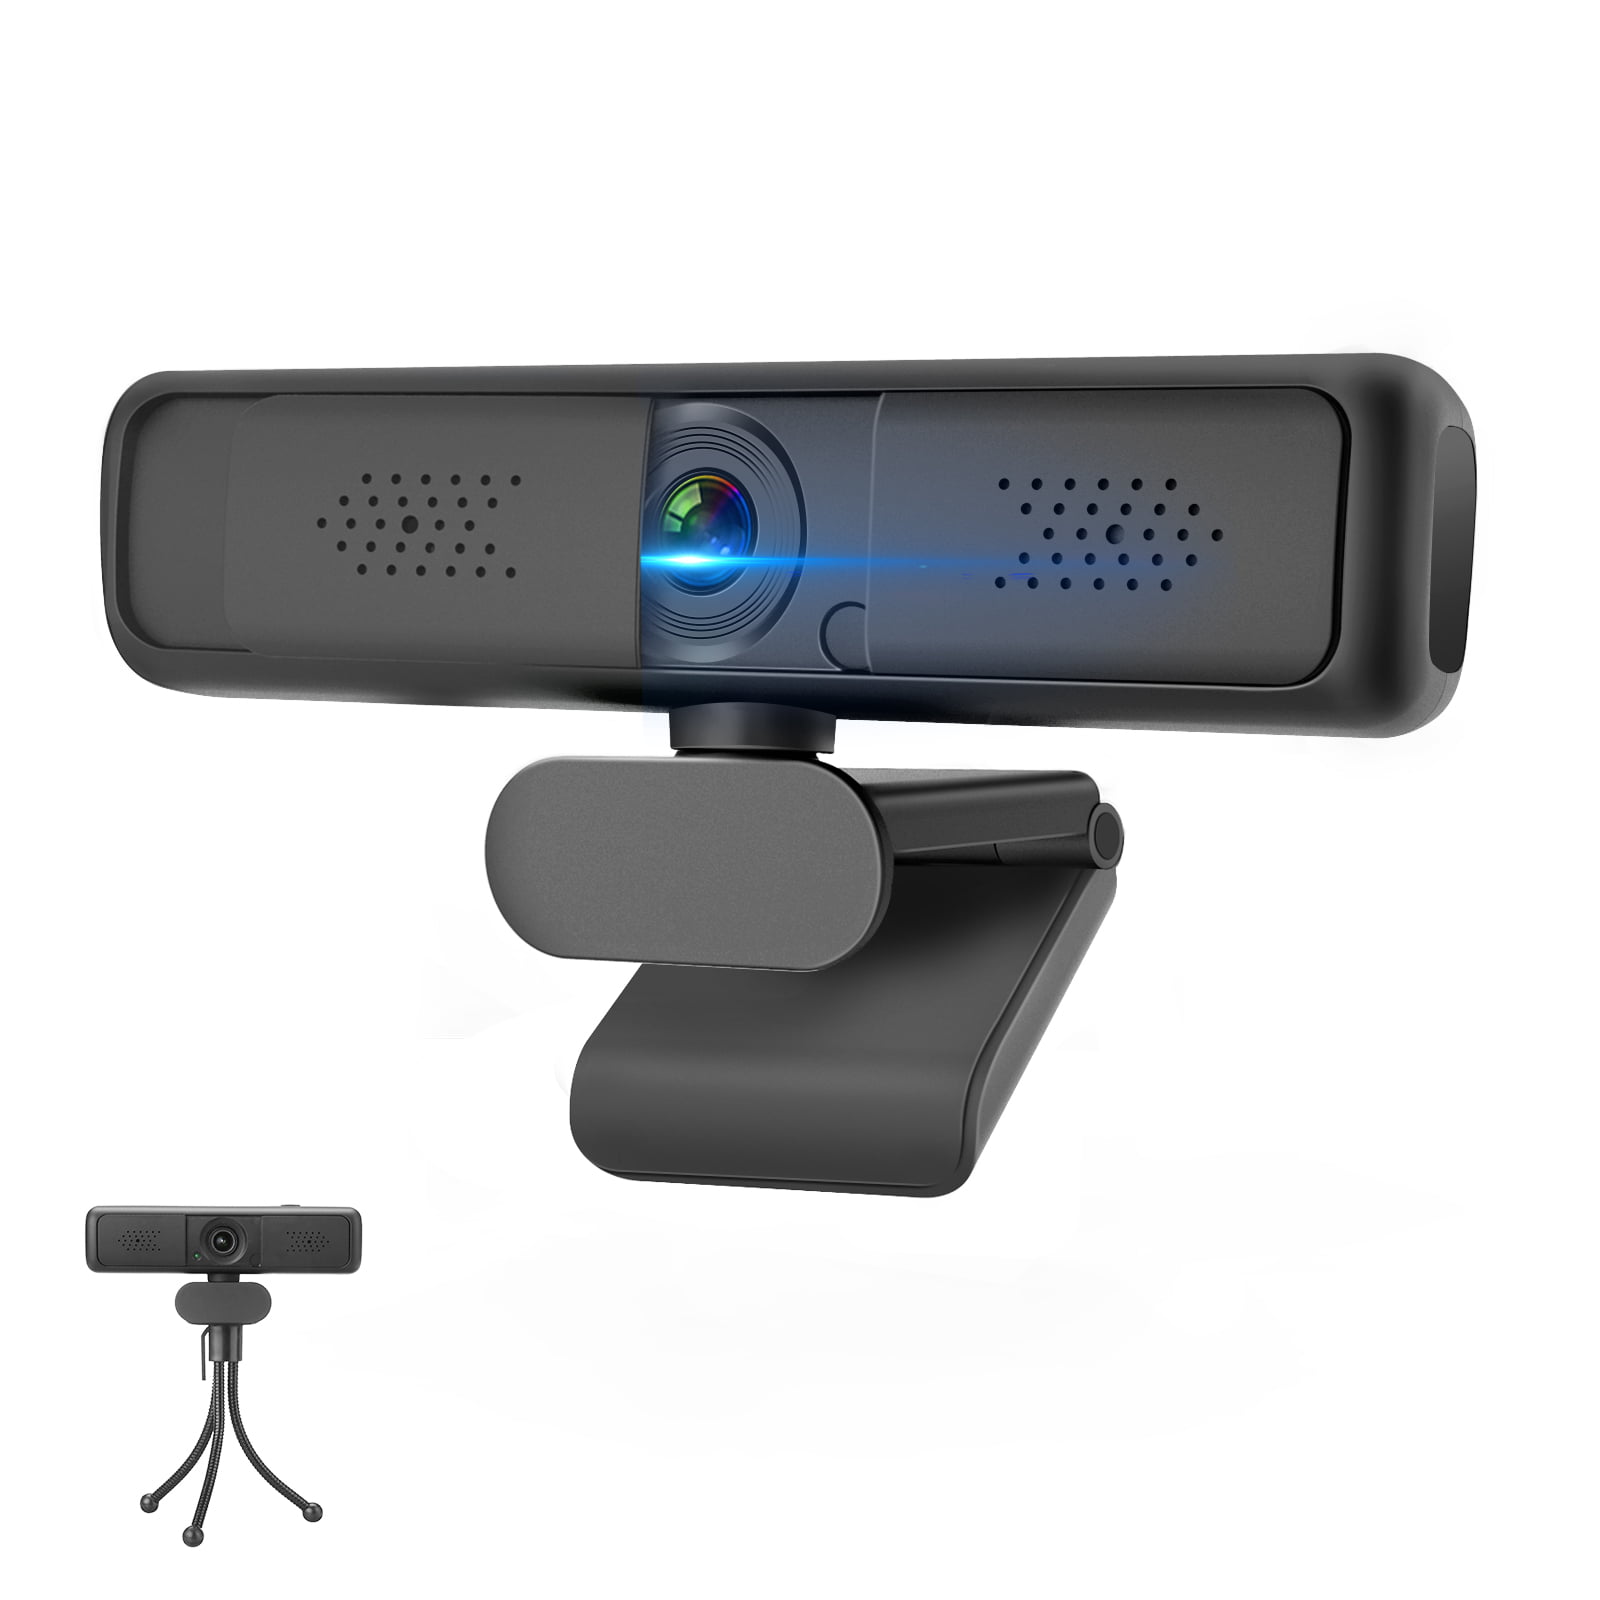 1440P HD Computer Webcam with Microphone, Privacy Cover and Tripod, Auto Fill Light USB PC Web Camera, Wide-Angle View Webcam for Mac, TV, Laptop, Windows, Skype - Walmart.com